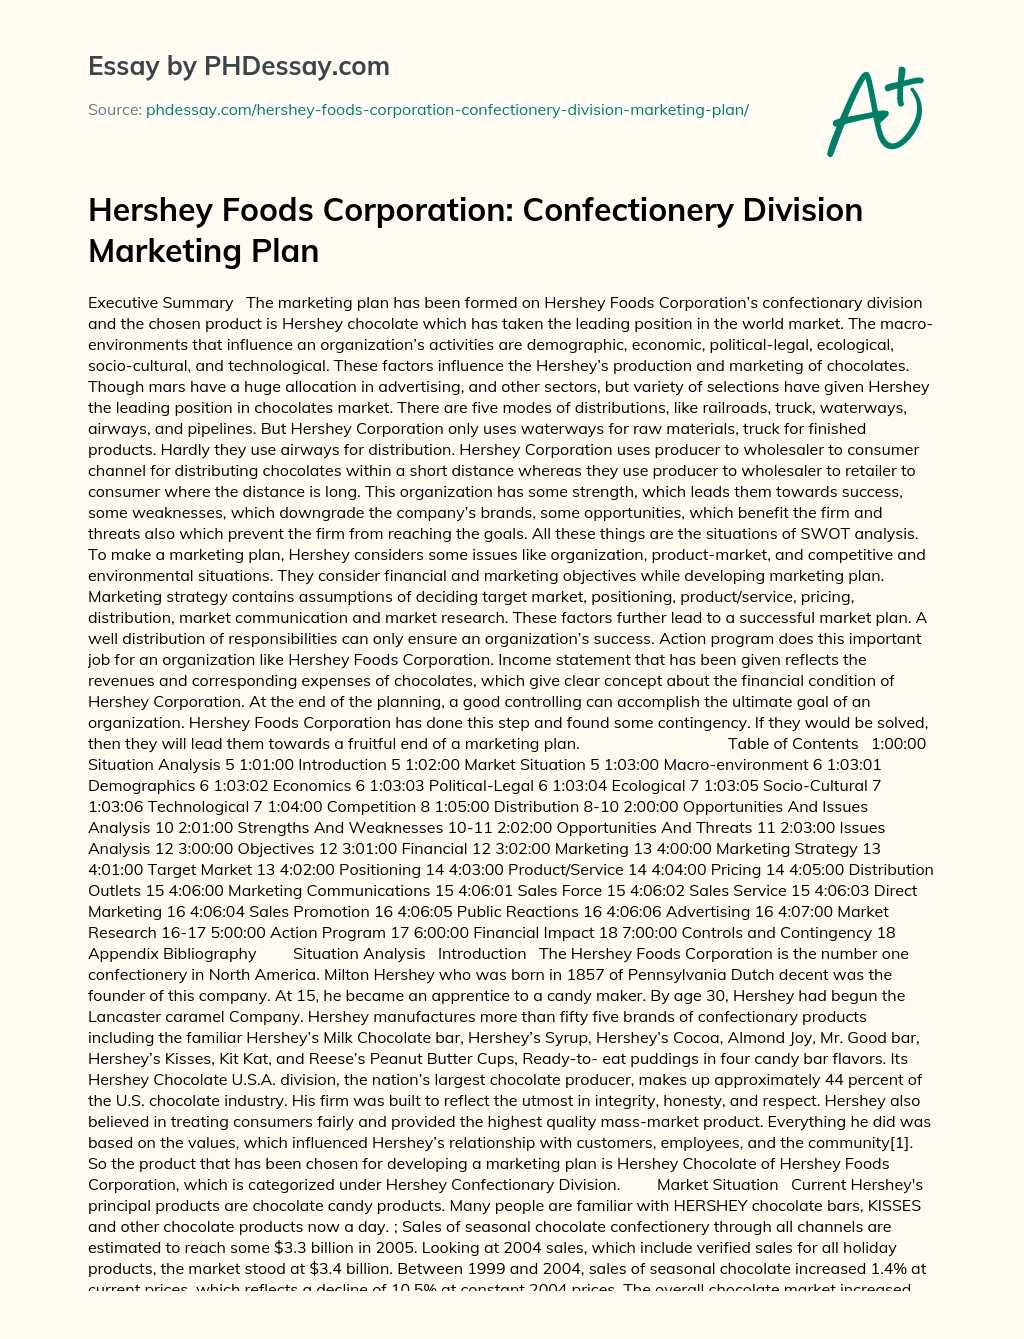 Hershey Foods Corporation: Confectionery Division Marketing Plan essay